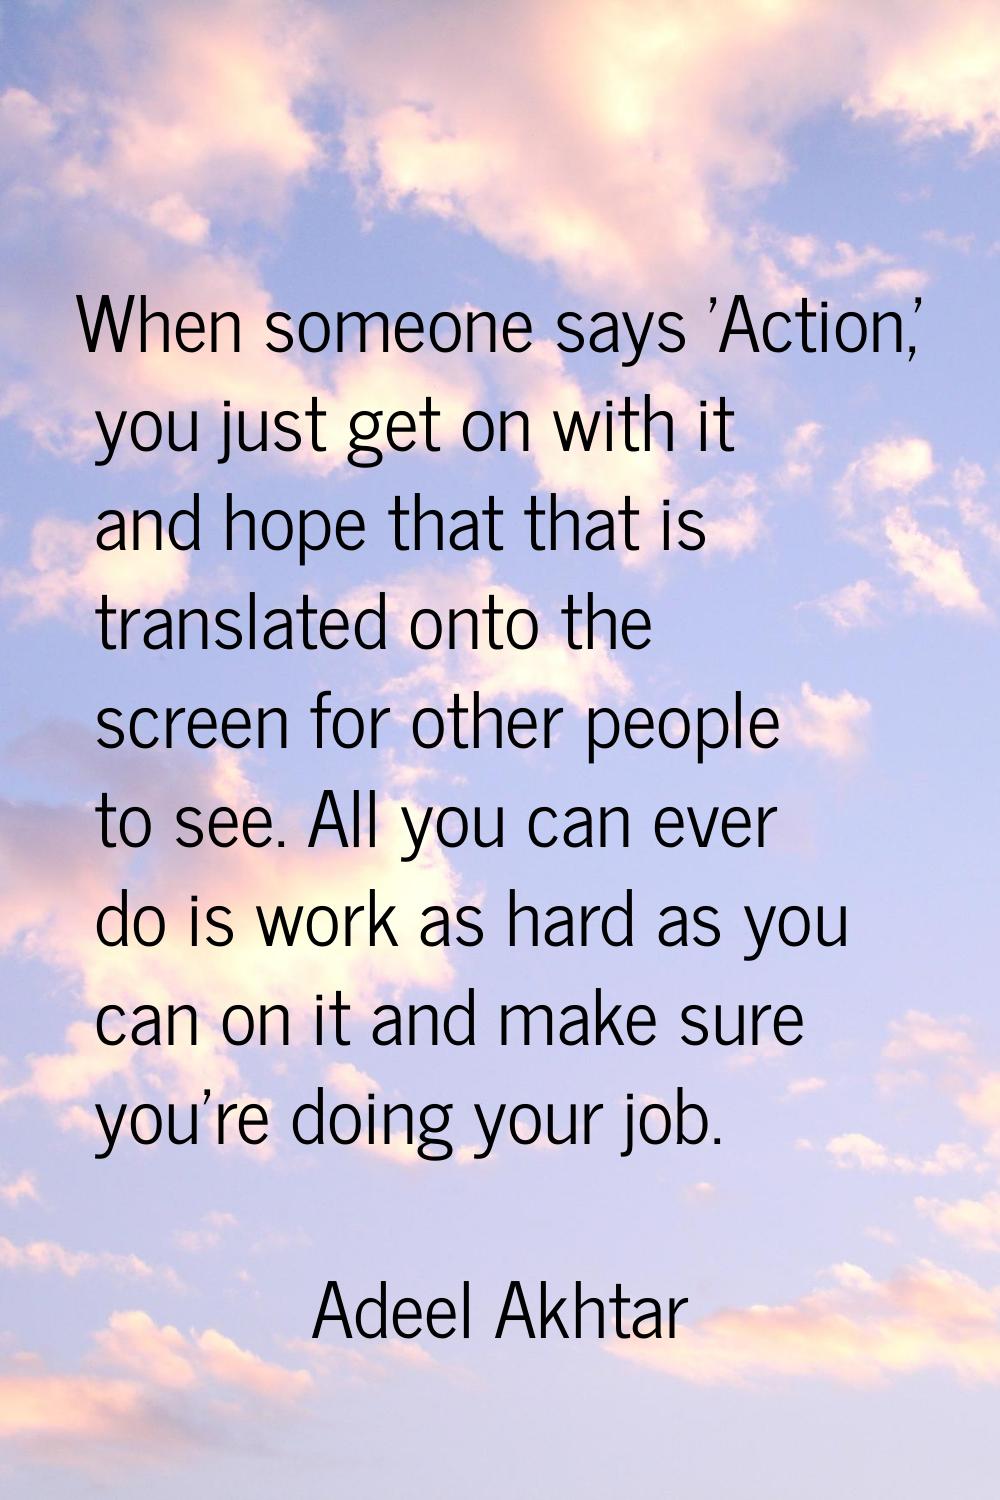 When someone says 'Action,' you just get on with it and hope that that is translated onto the scree